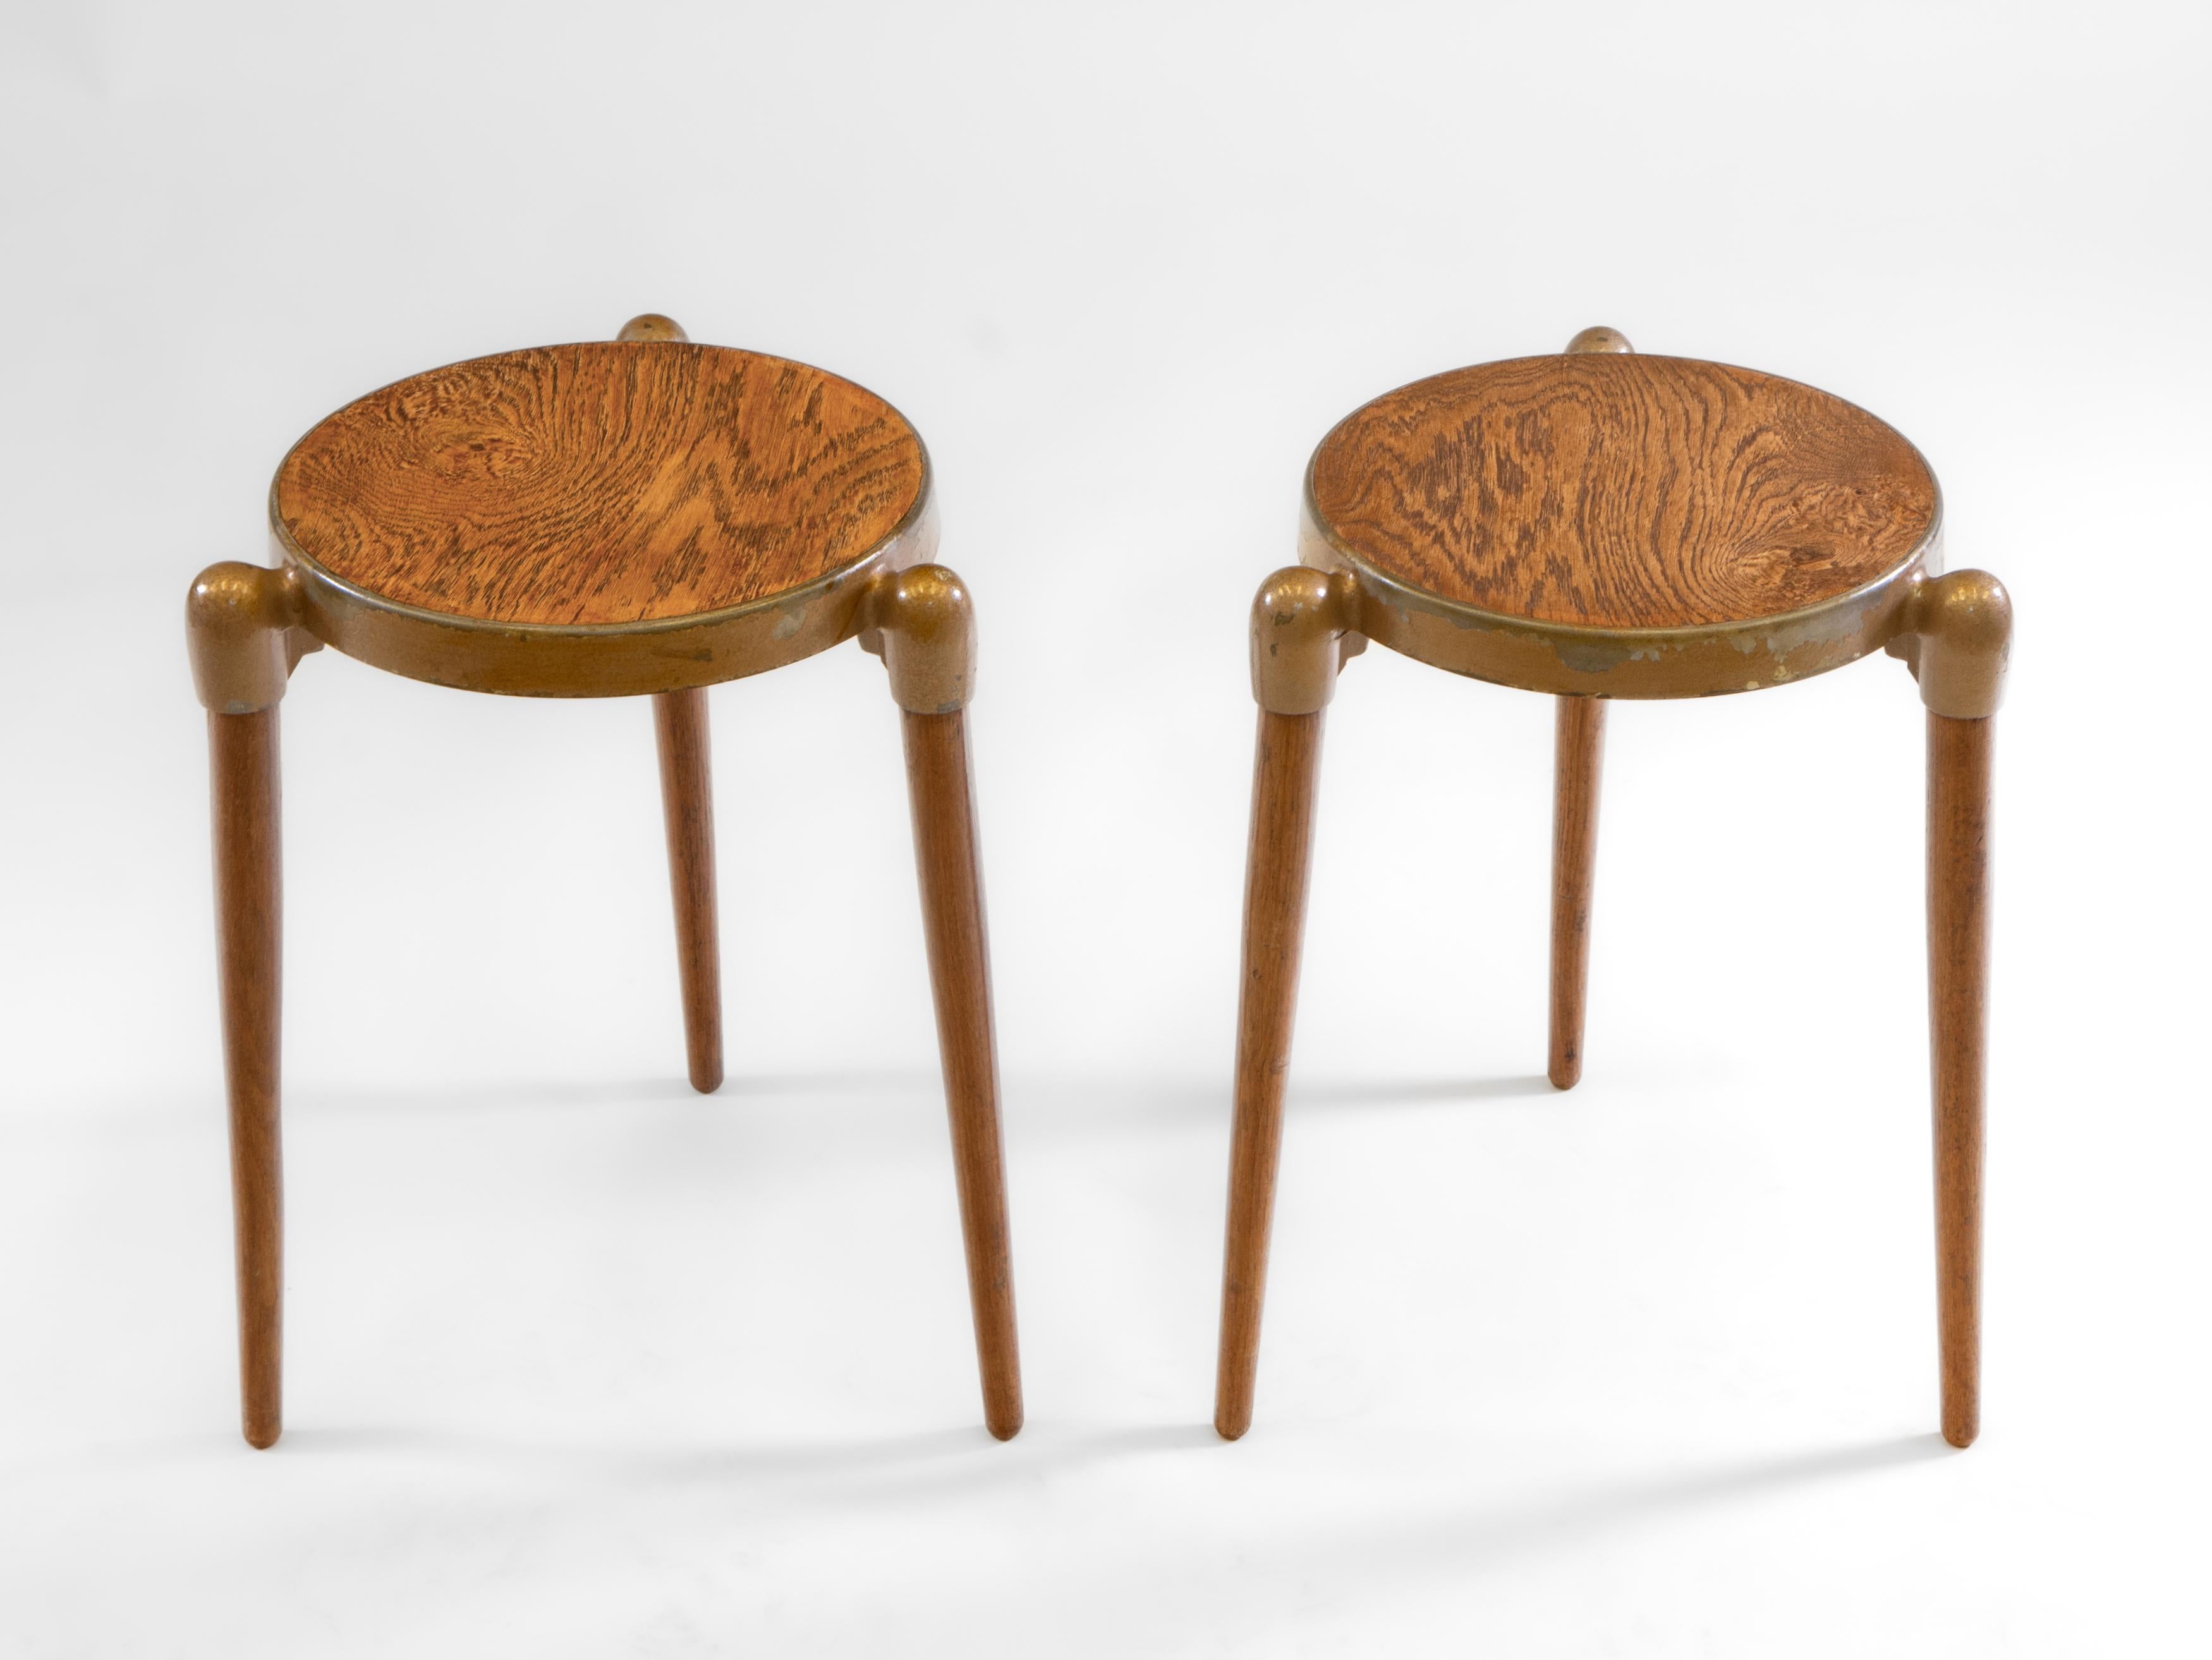  A fabulous pair of oak and cast aluminium 'TV-T' side tables, designed by Gerald Summers (British 1899-1967). Cast maker's mark to undersides: GERALD SUMMERS/ REGISTERED DESIGN NO 871987.  1953 - 1958.

Mid Century Modernism - The pair have the